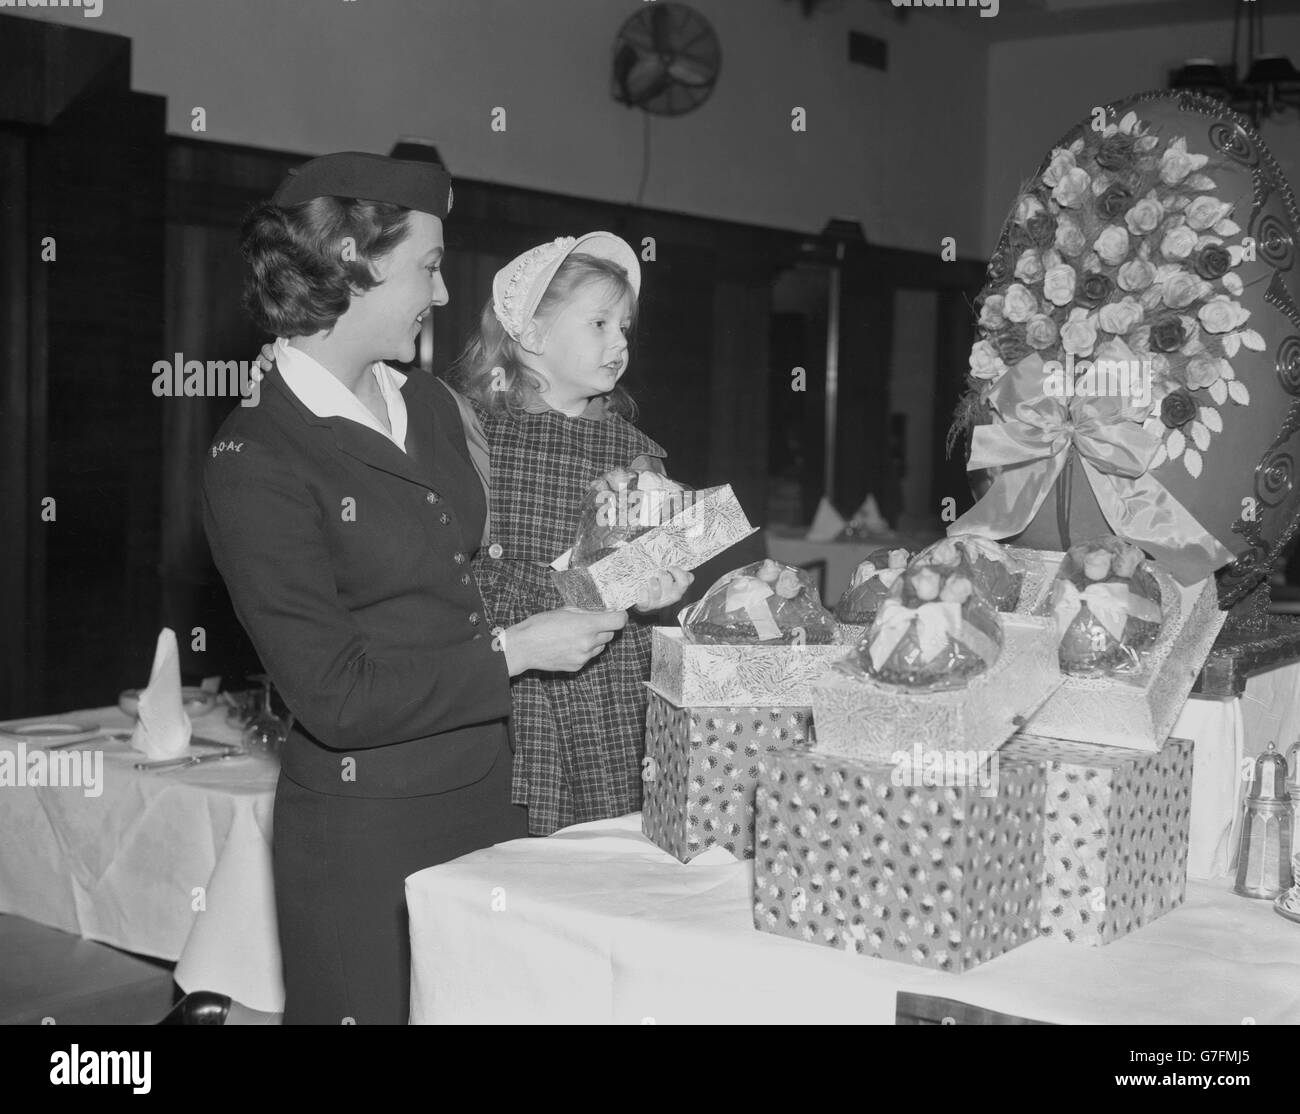 Five-year-old Holly Larsen, of Latrobe, Pennsylvania, USA, looks amazed as she compares the giant Easter egg on display at the BOAC Air Terminal, Victoria, London, with the smaller egg she is taking to her father in Bahrain. With Holly, who had just flown in by BOAC Comet jetliner from New York, is 24-year-old BOAC receptionist Joanne Symons, of Charles Street, London. Stock Photo